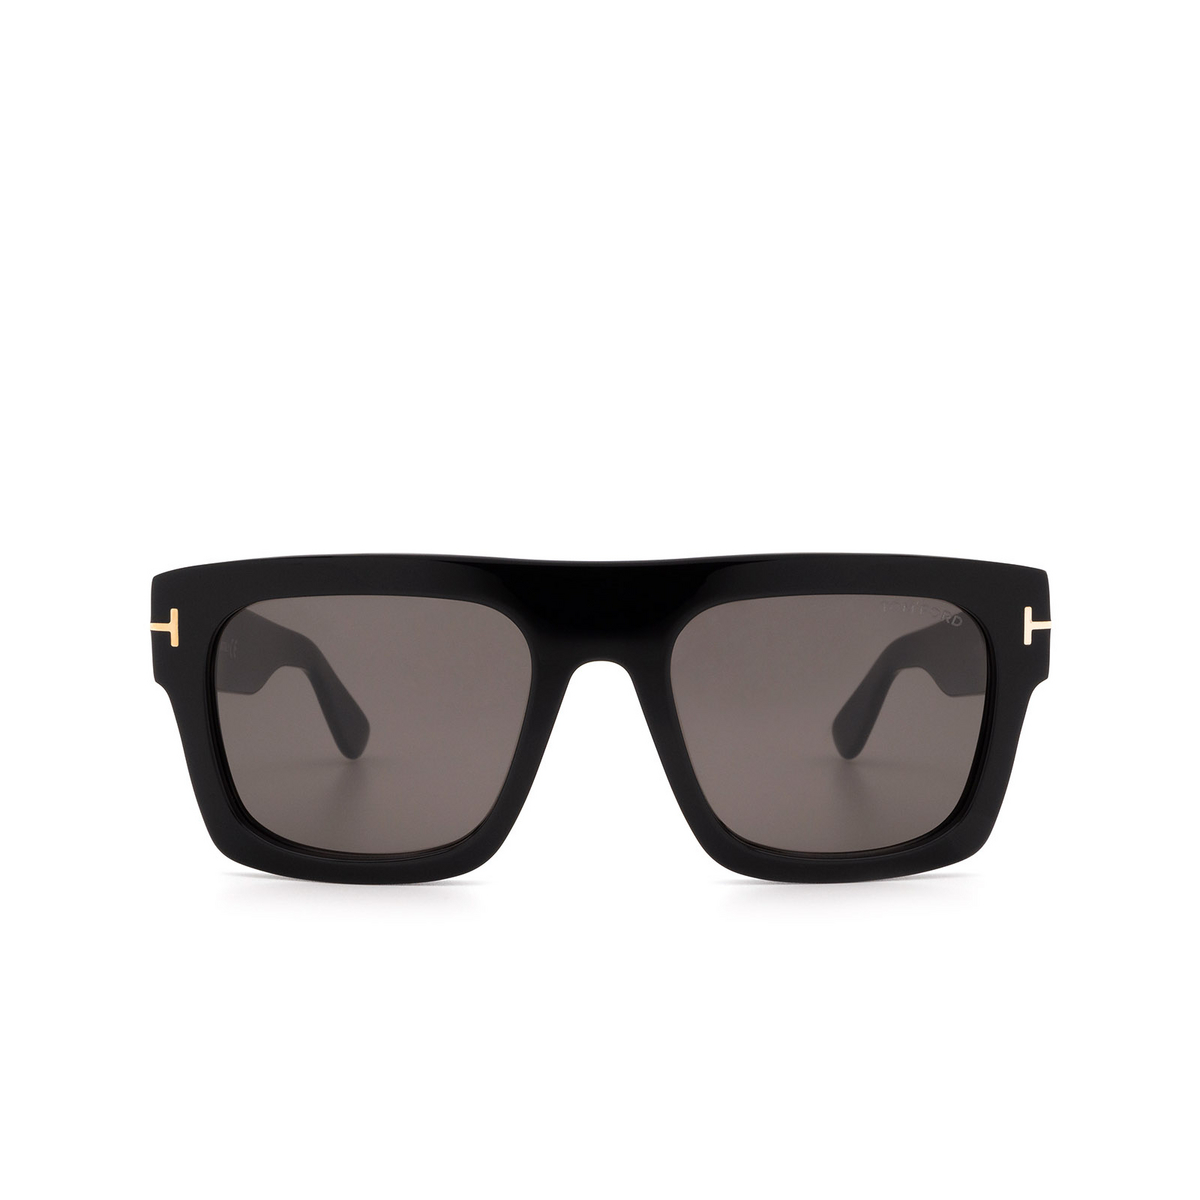 Tom Ford FAUSTO Sunglasses 01A Black - front view